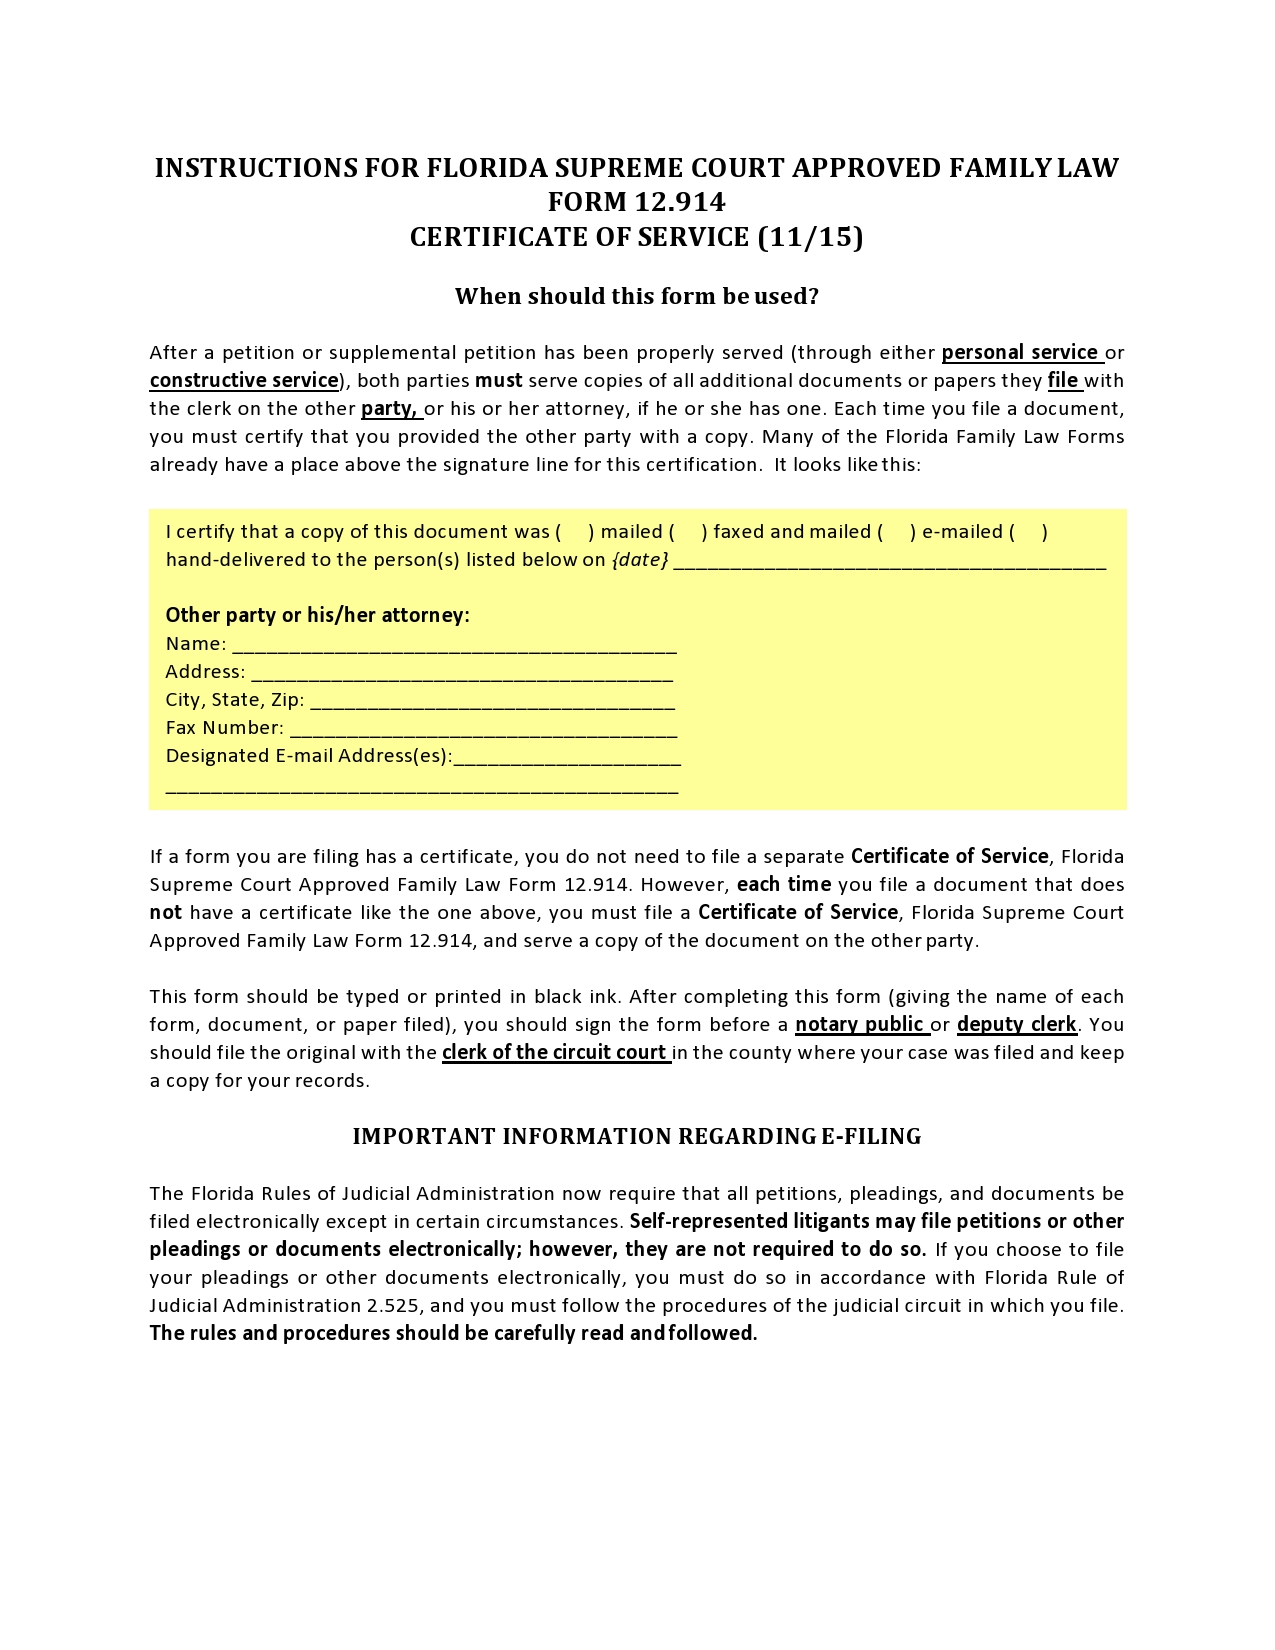 Free proof of service form 12